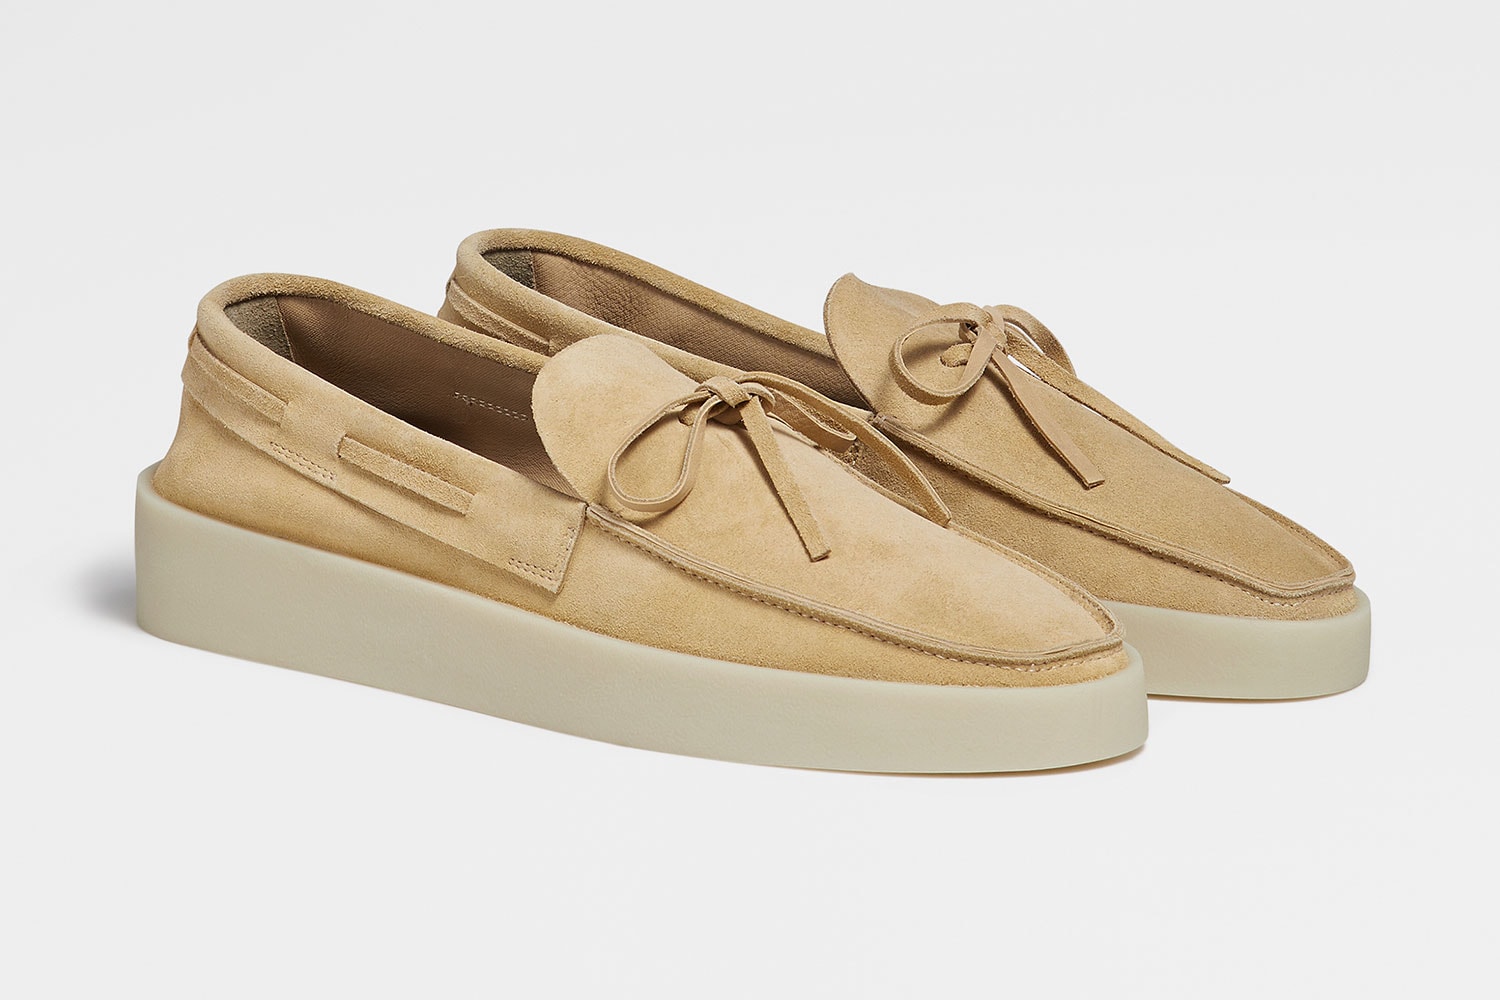 Fear of God Exclusively for Ermenegildo Zegna Footwear Collection suede lace up loafers menswear release info